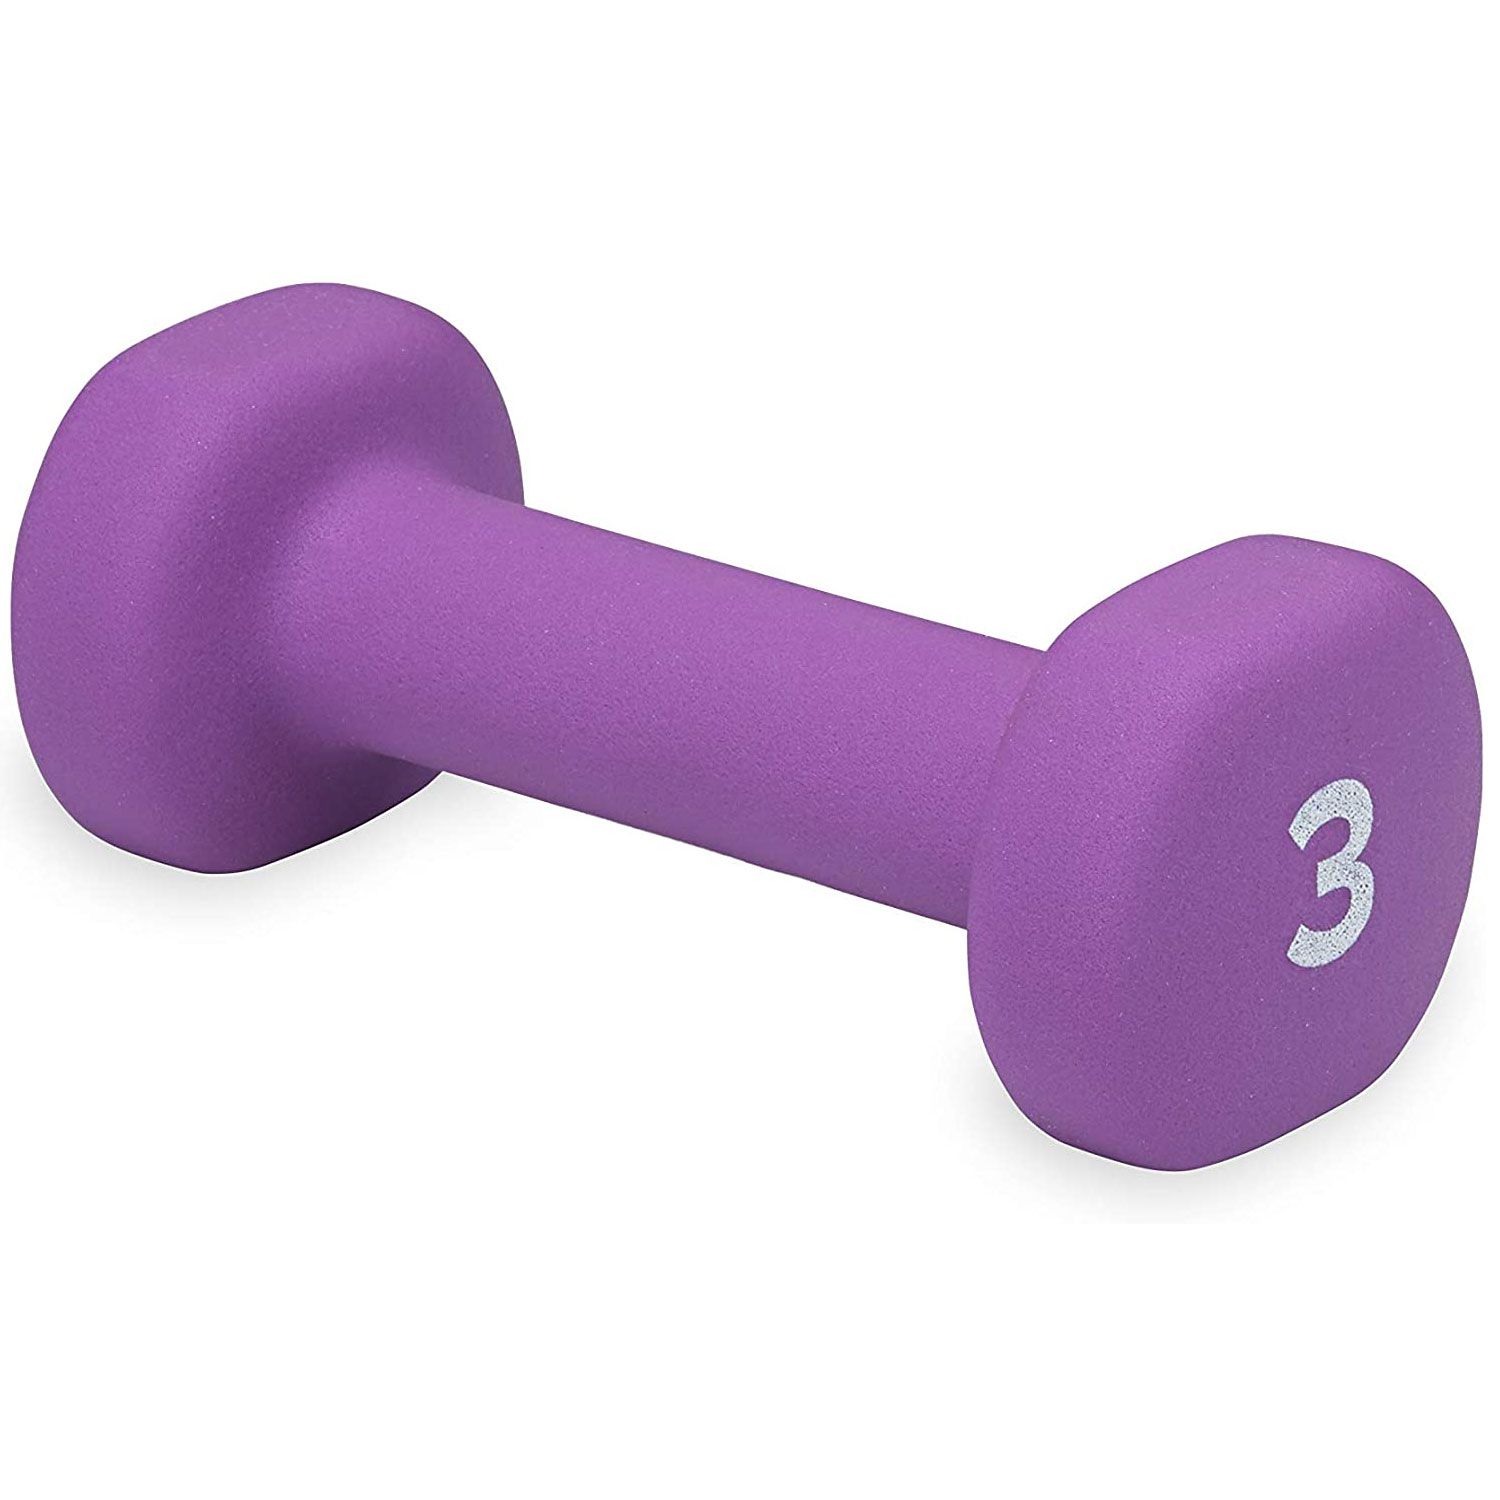 Best for Beginners: Gaiam Dumbbell Hand Weight